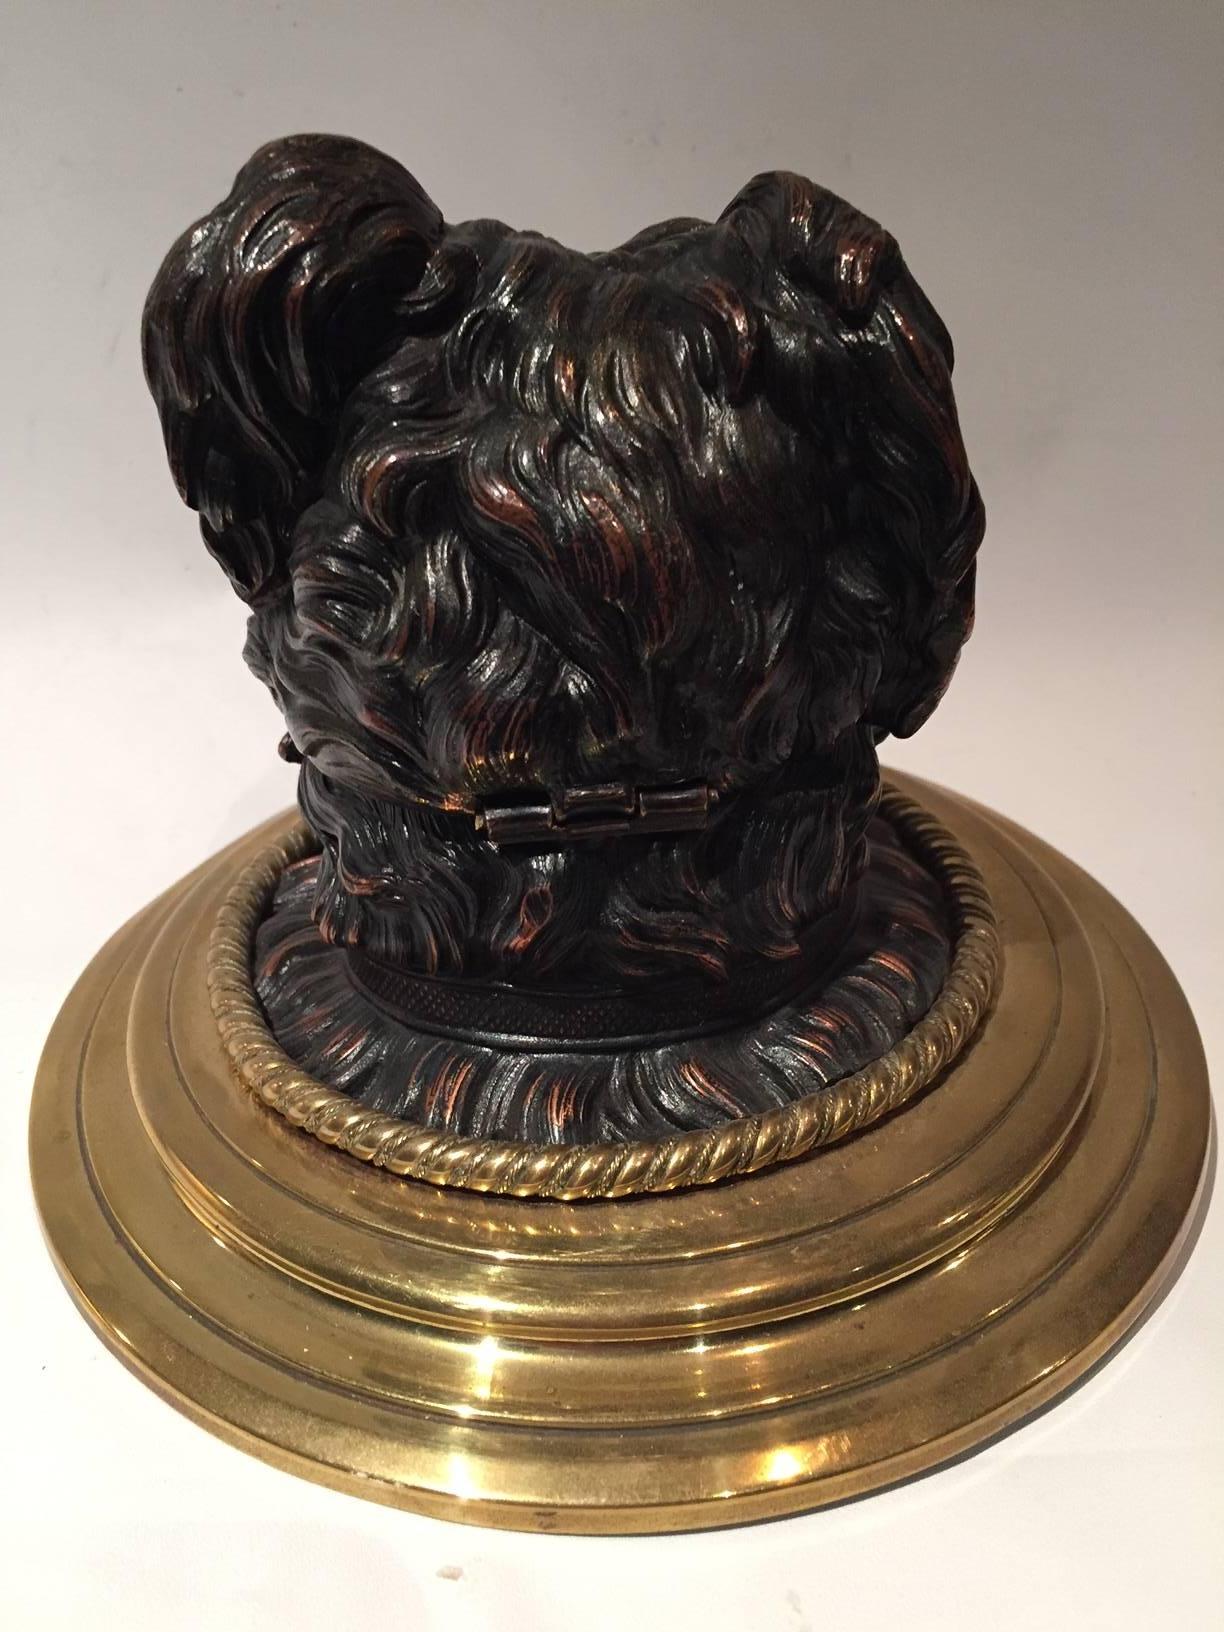 Barbizon School Late 19th or Early 20th Century Yorkshire Terrier Dog Bronze French Inkwell